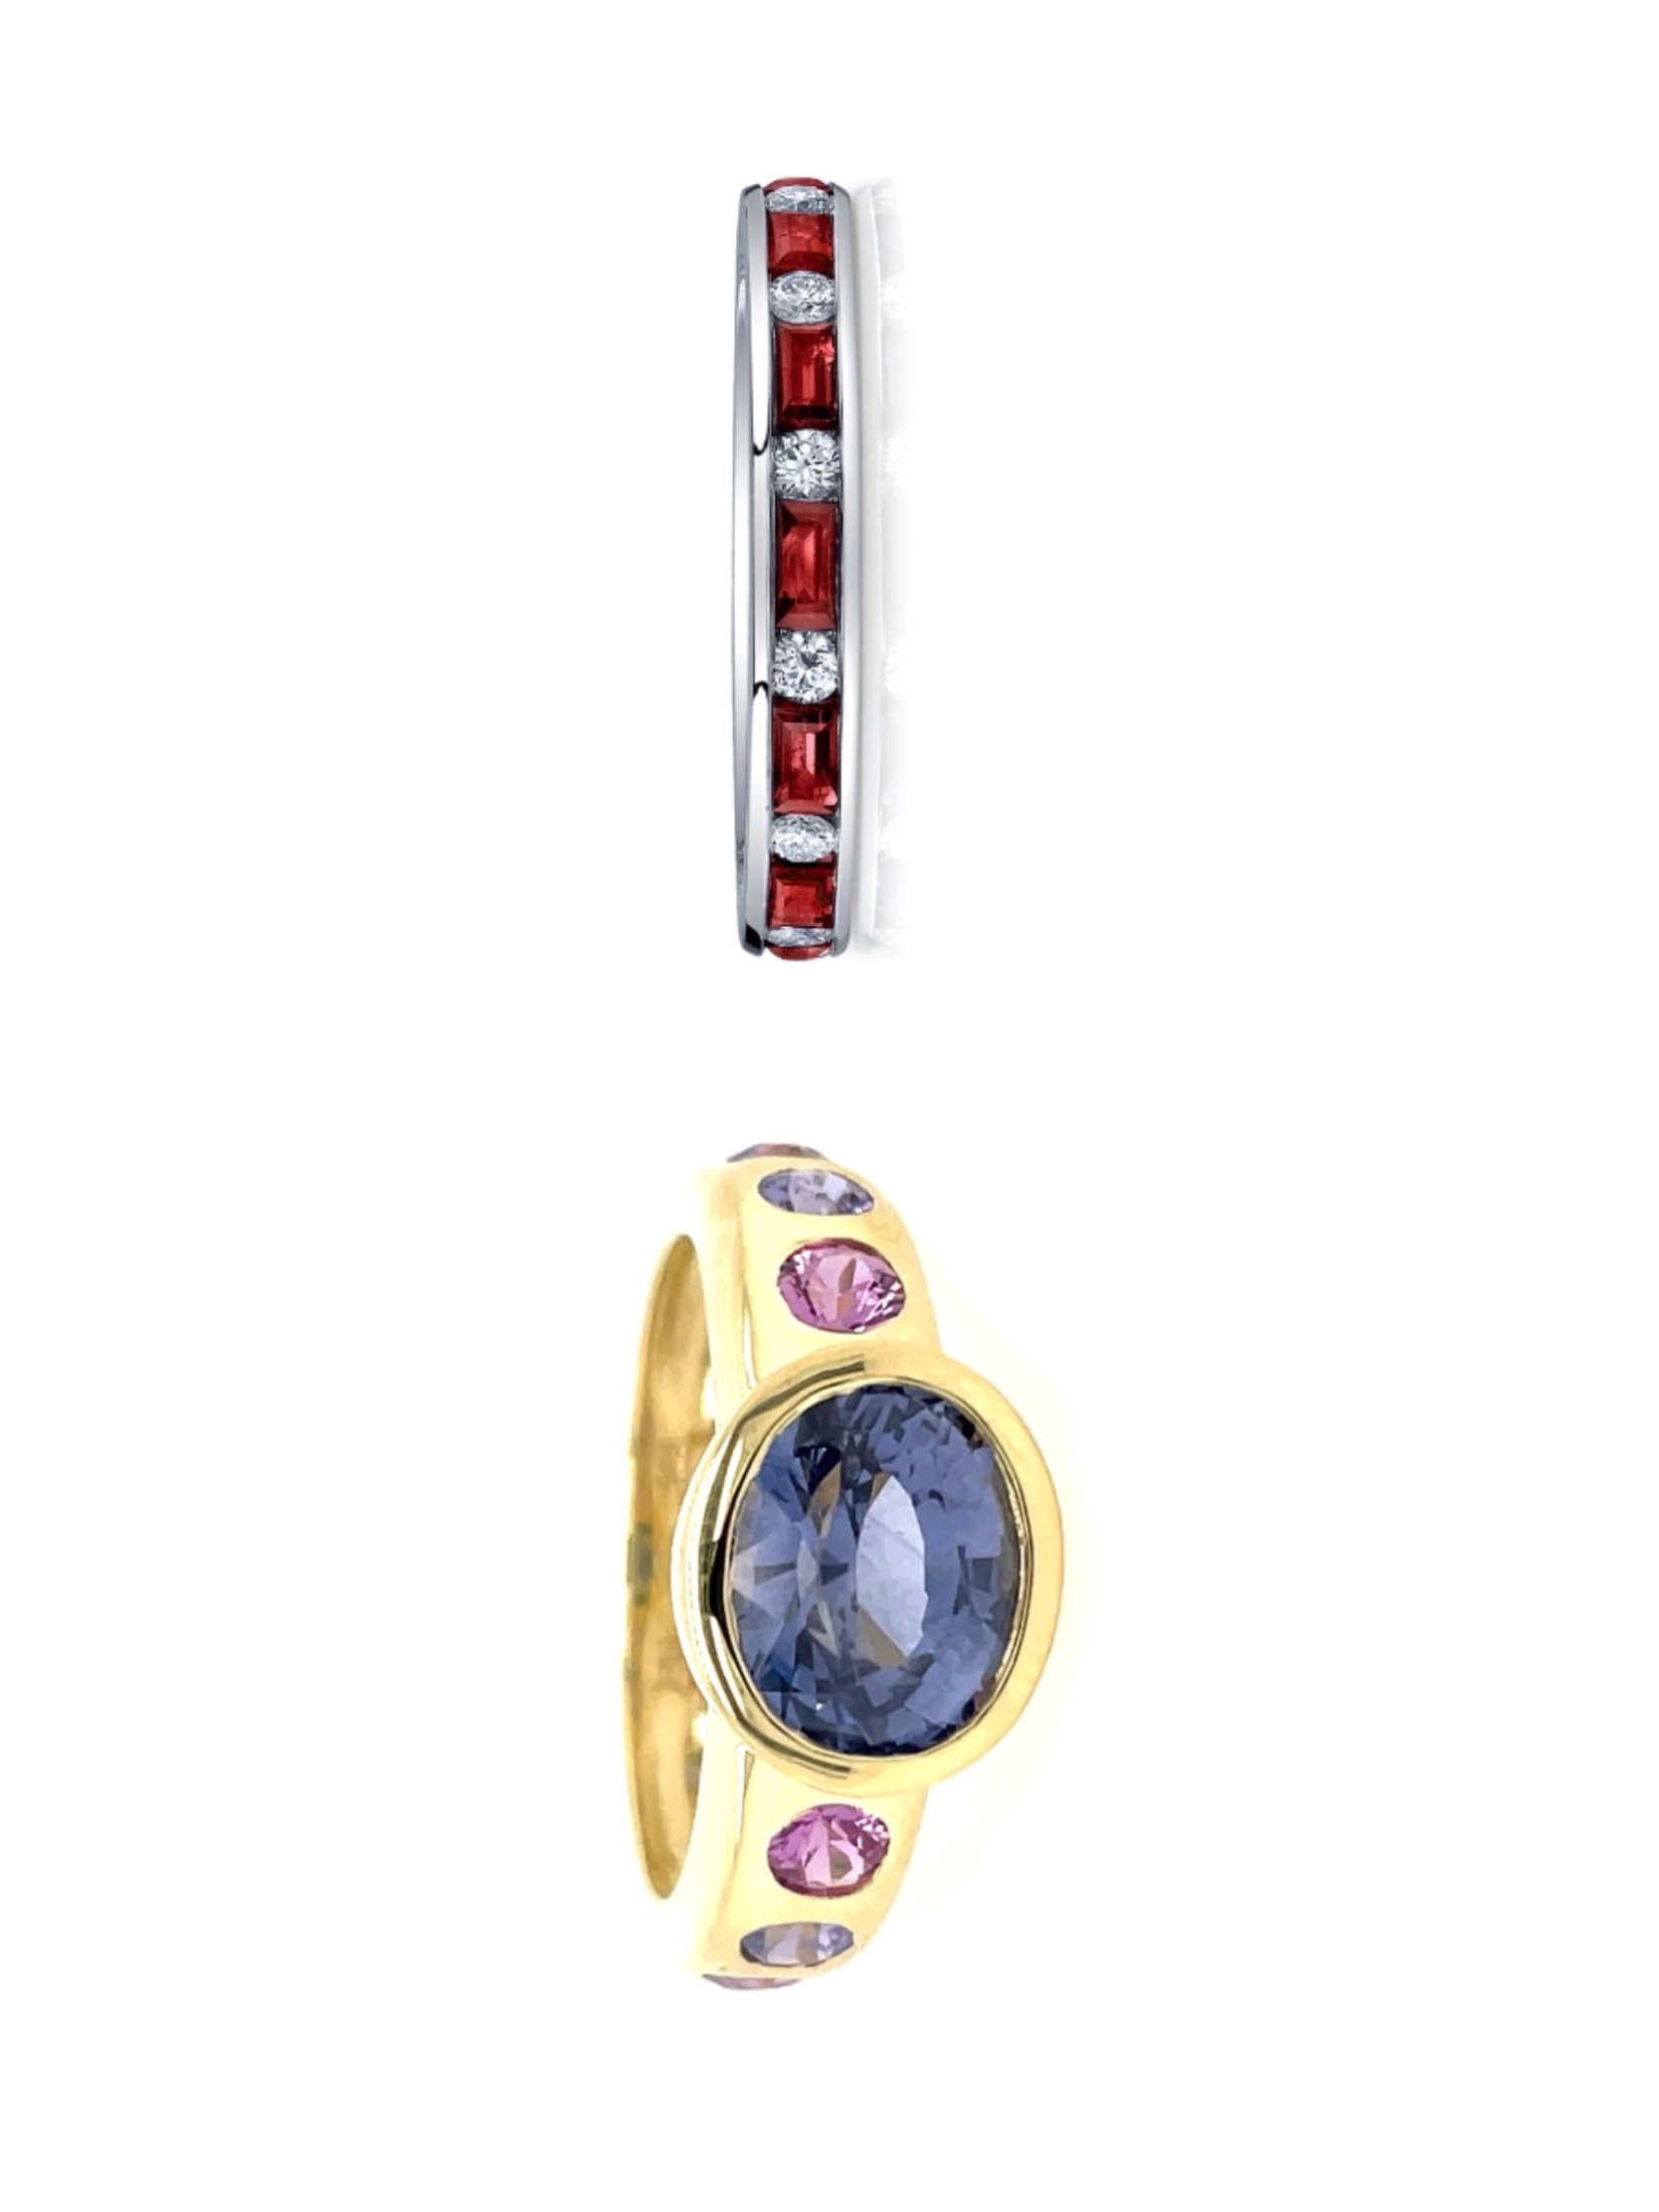 Gorgeous Deutsch Signature Diamond and Ruby Eternity Band and yellow gold and sapphire Samira Ring by Lauren K, both are available at Deutsch Fine Jewelry in Houston, Texas.